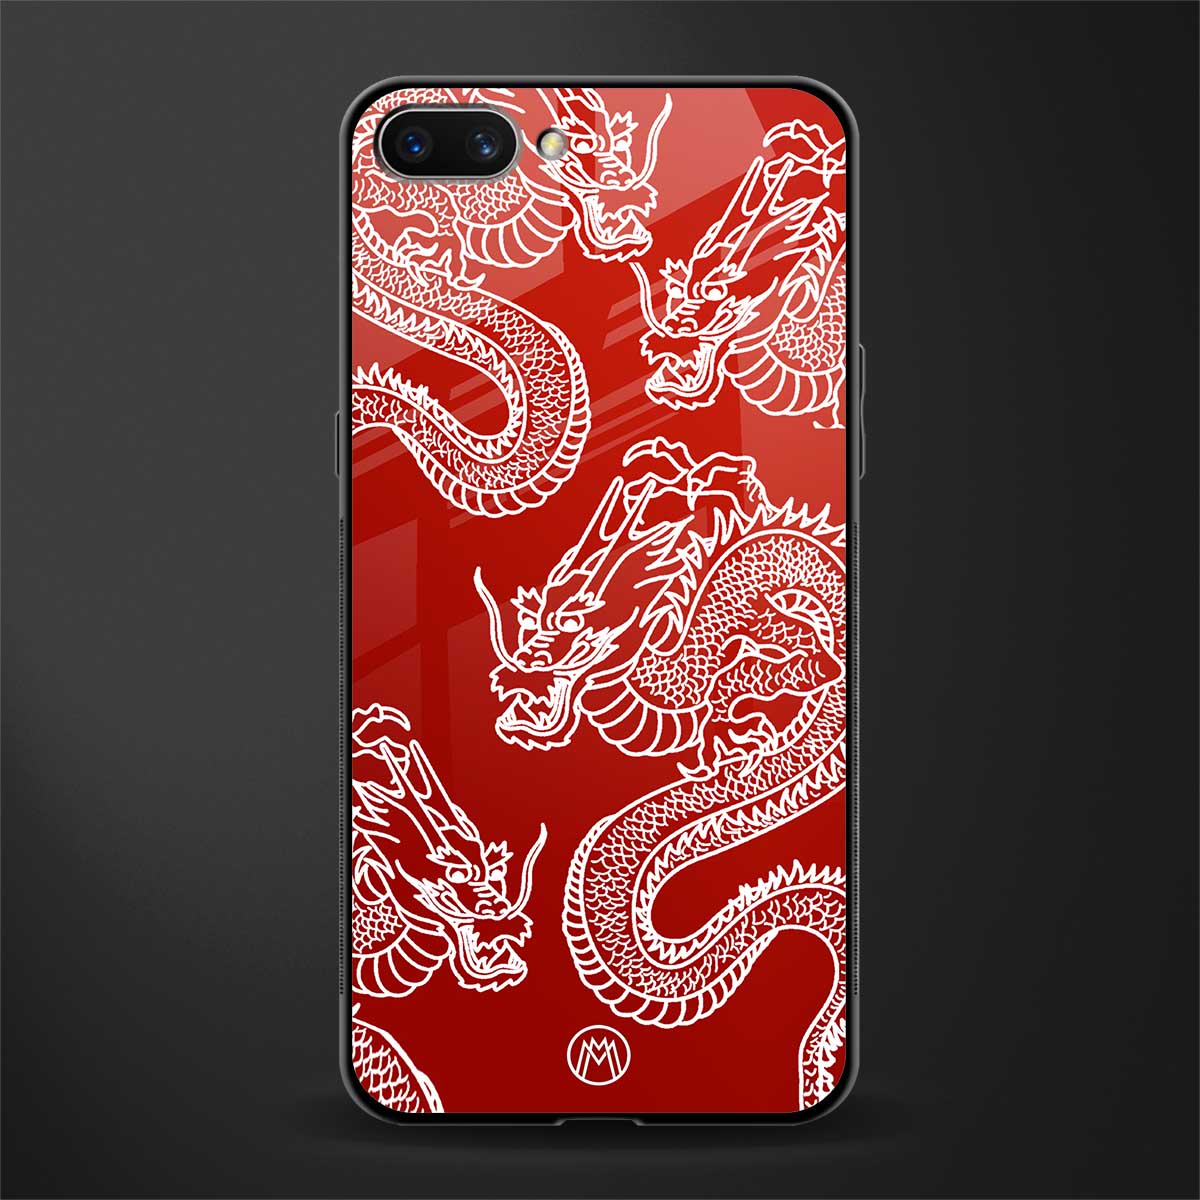 dragons red glass case for realme c1 image